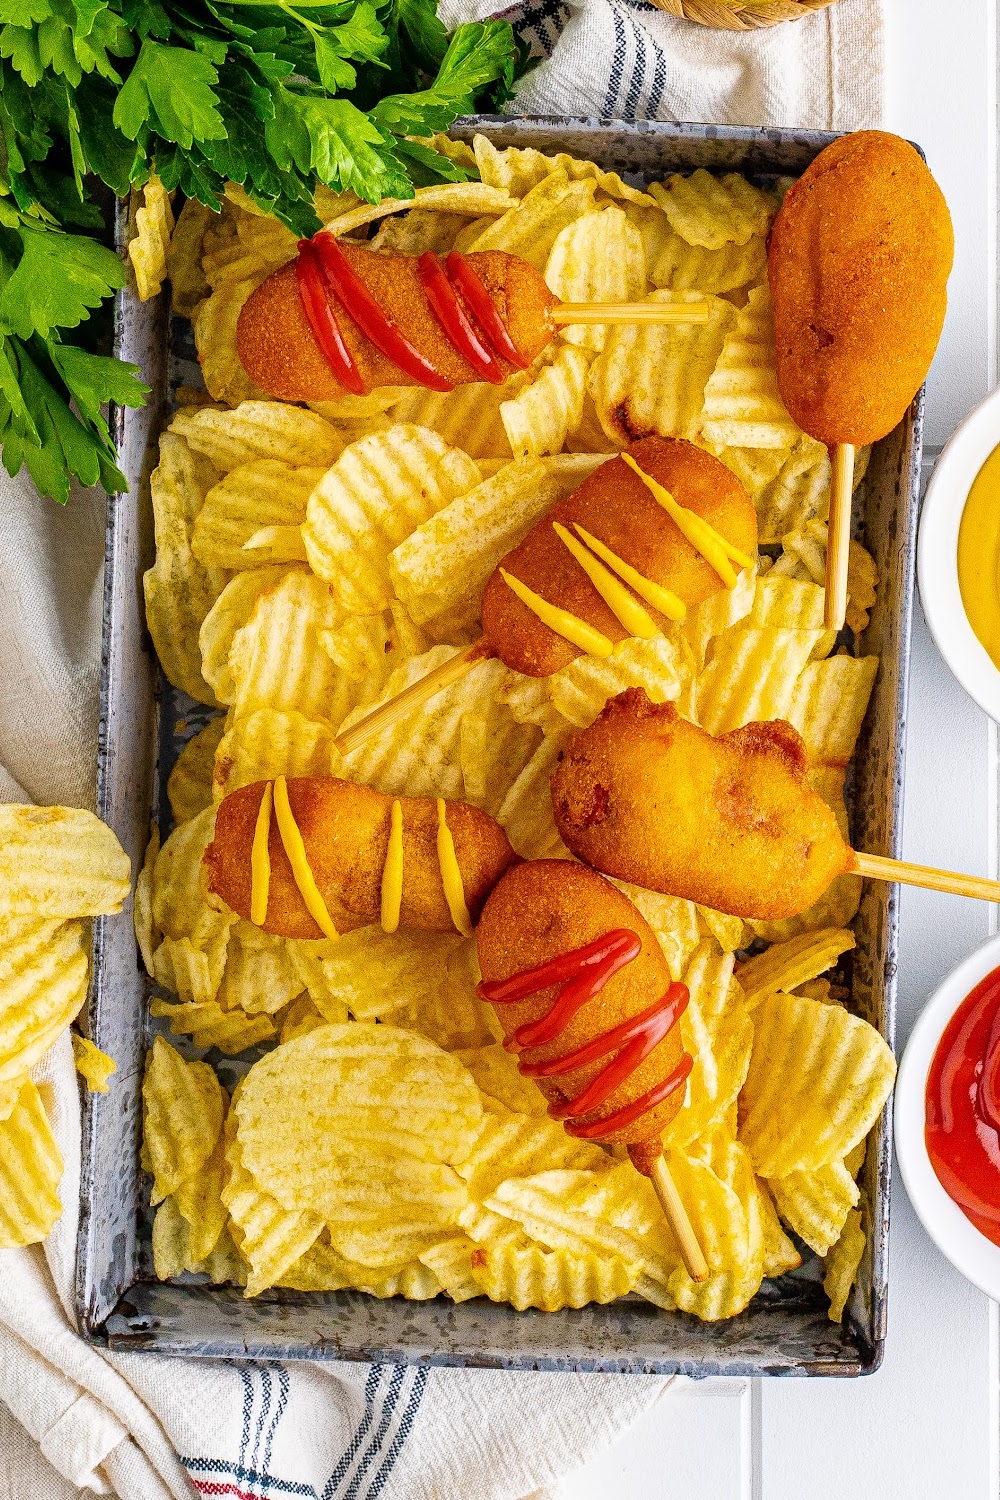 Six corn dogs in a metal tray sitting on a pile of chips next to small white bowls filled with ketchup and mustard.